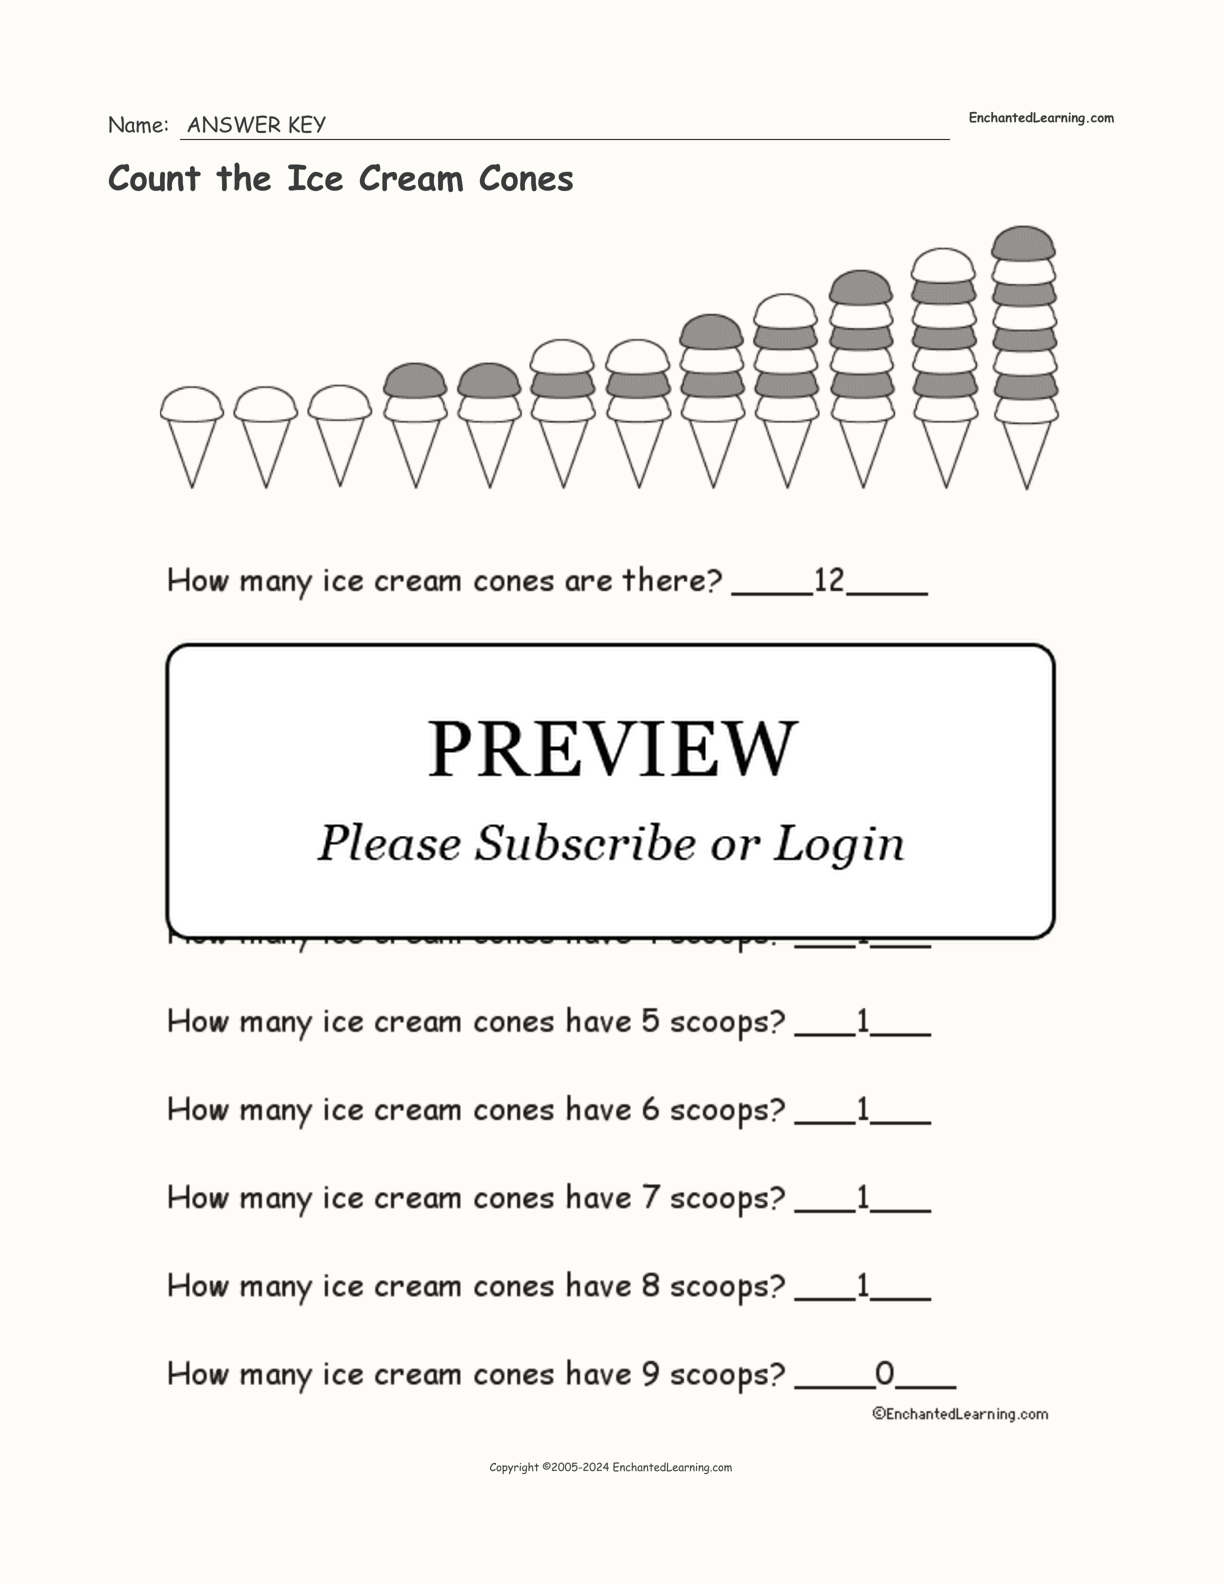 Count the Ice Cream Cones interactive worksheet page 2